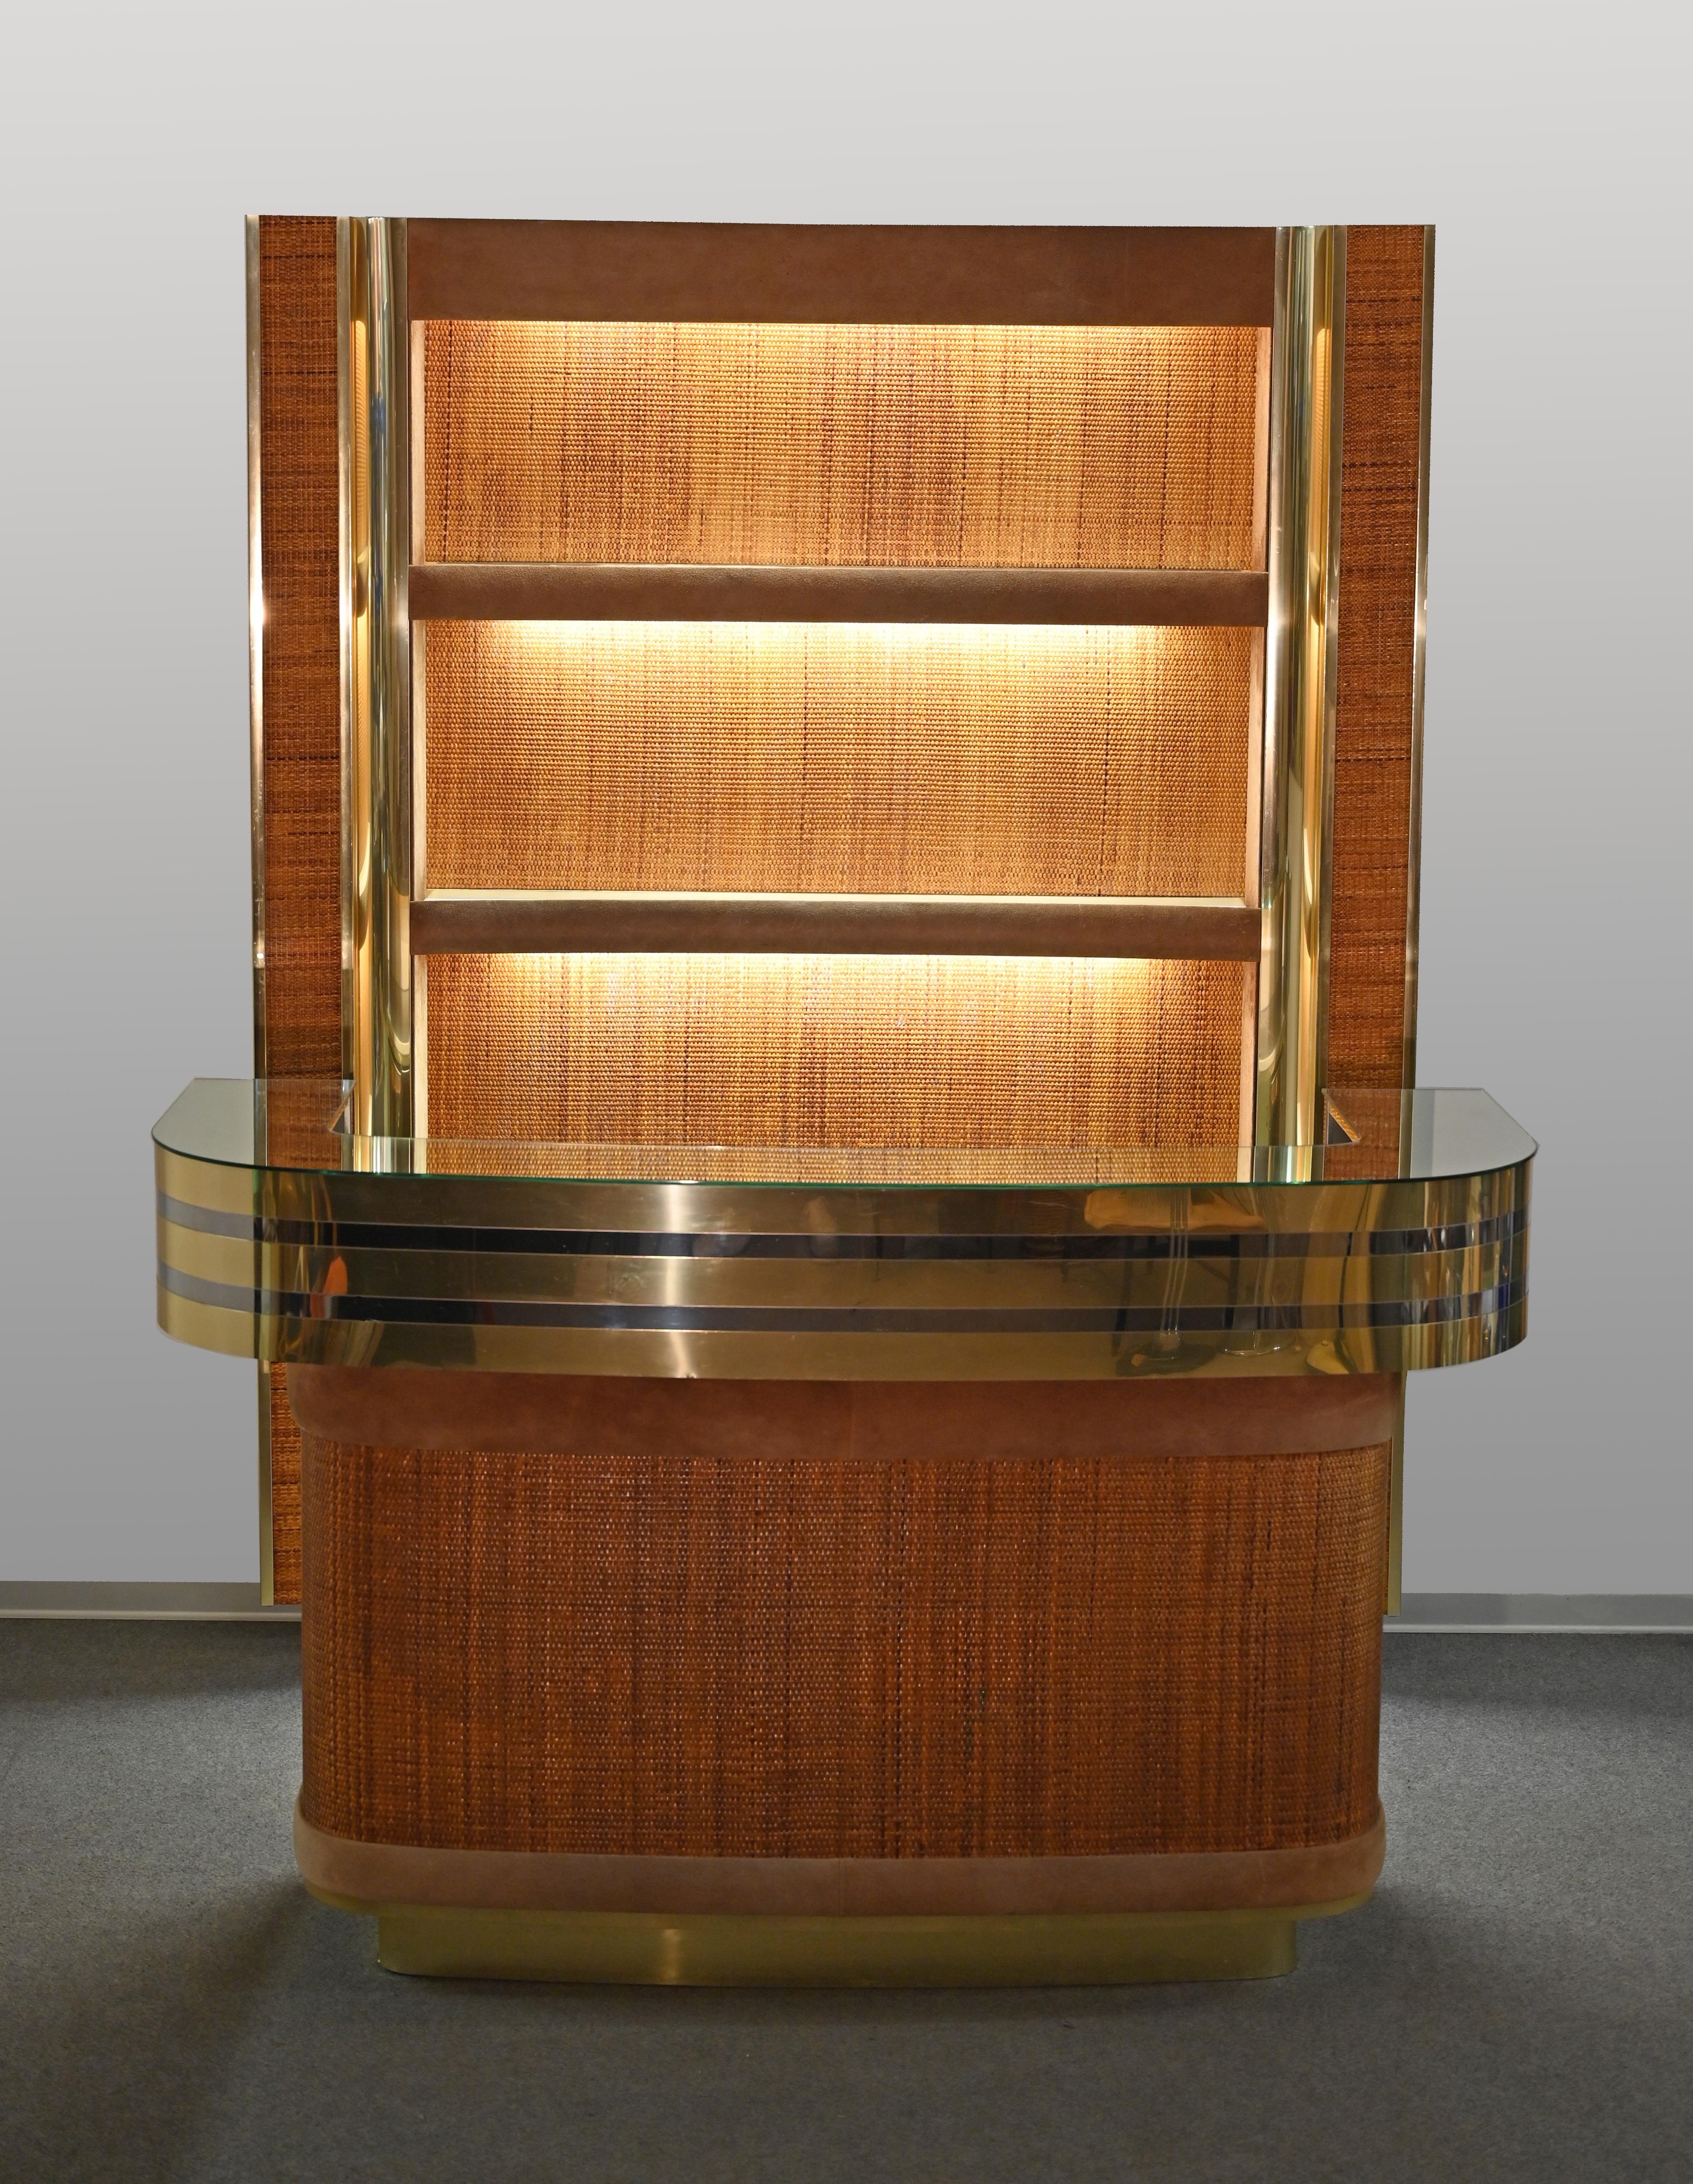 Hand-Crafted Hollywood Regency Illuminated Dry Bar in the Style of Willy Rizzo, Italy 1970s For Sale